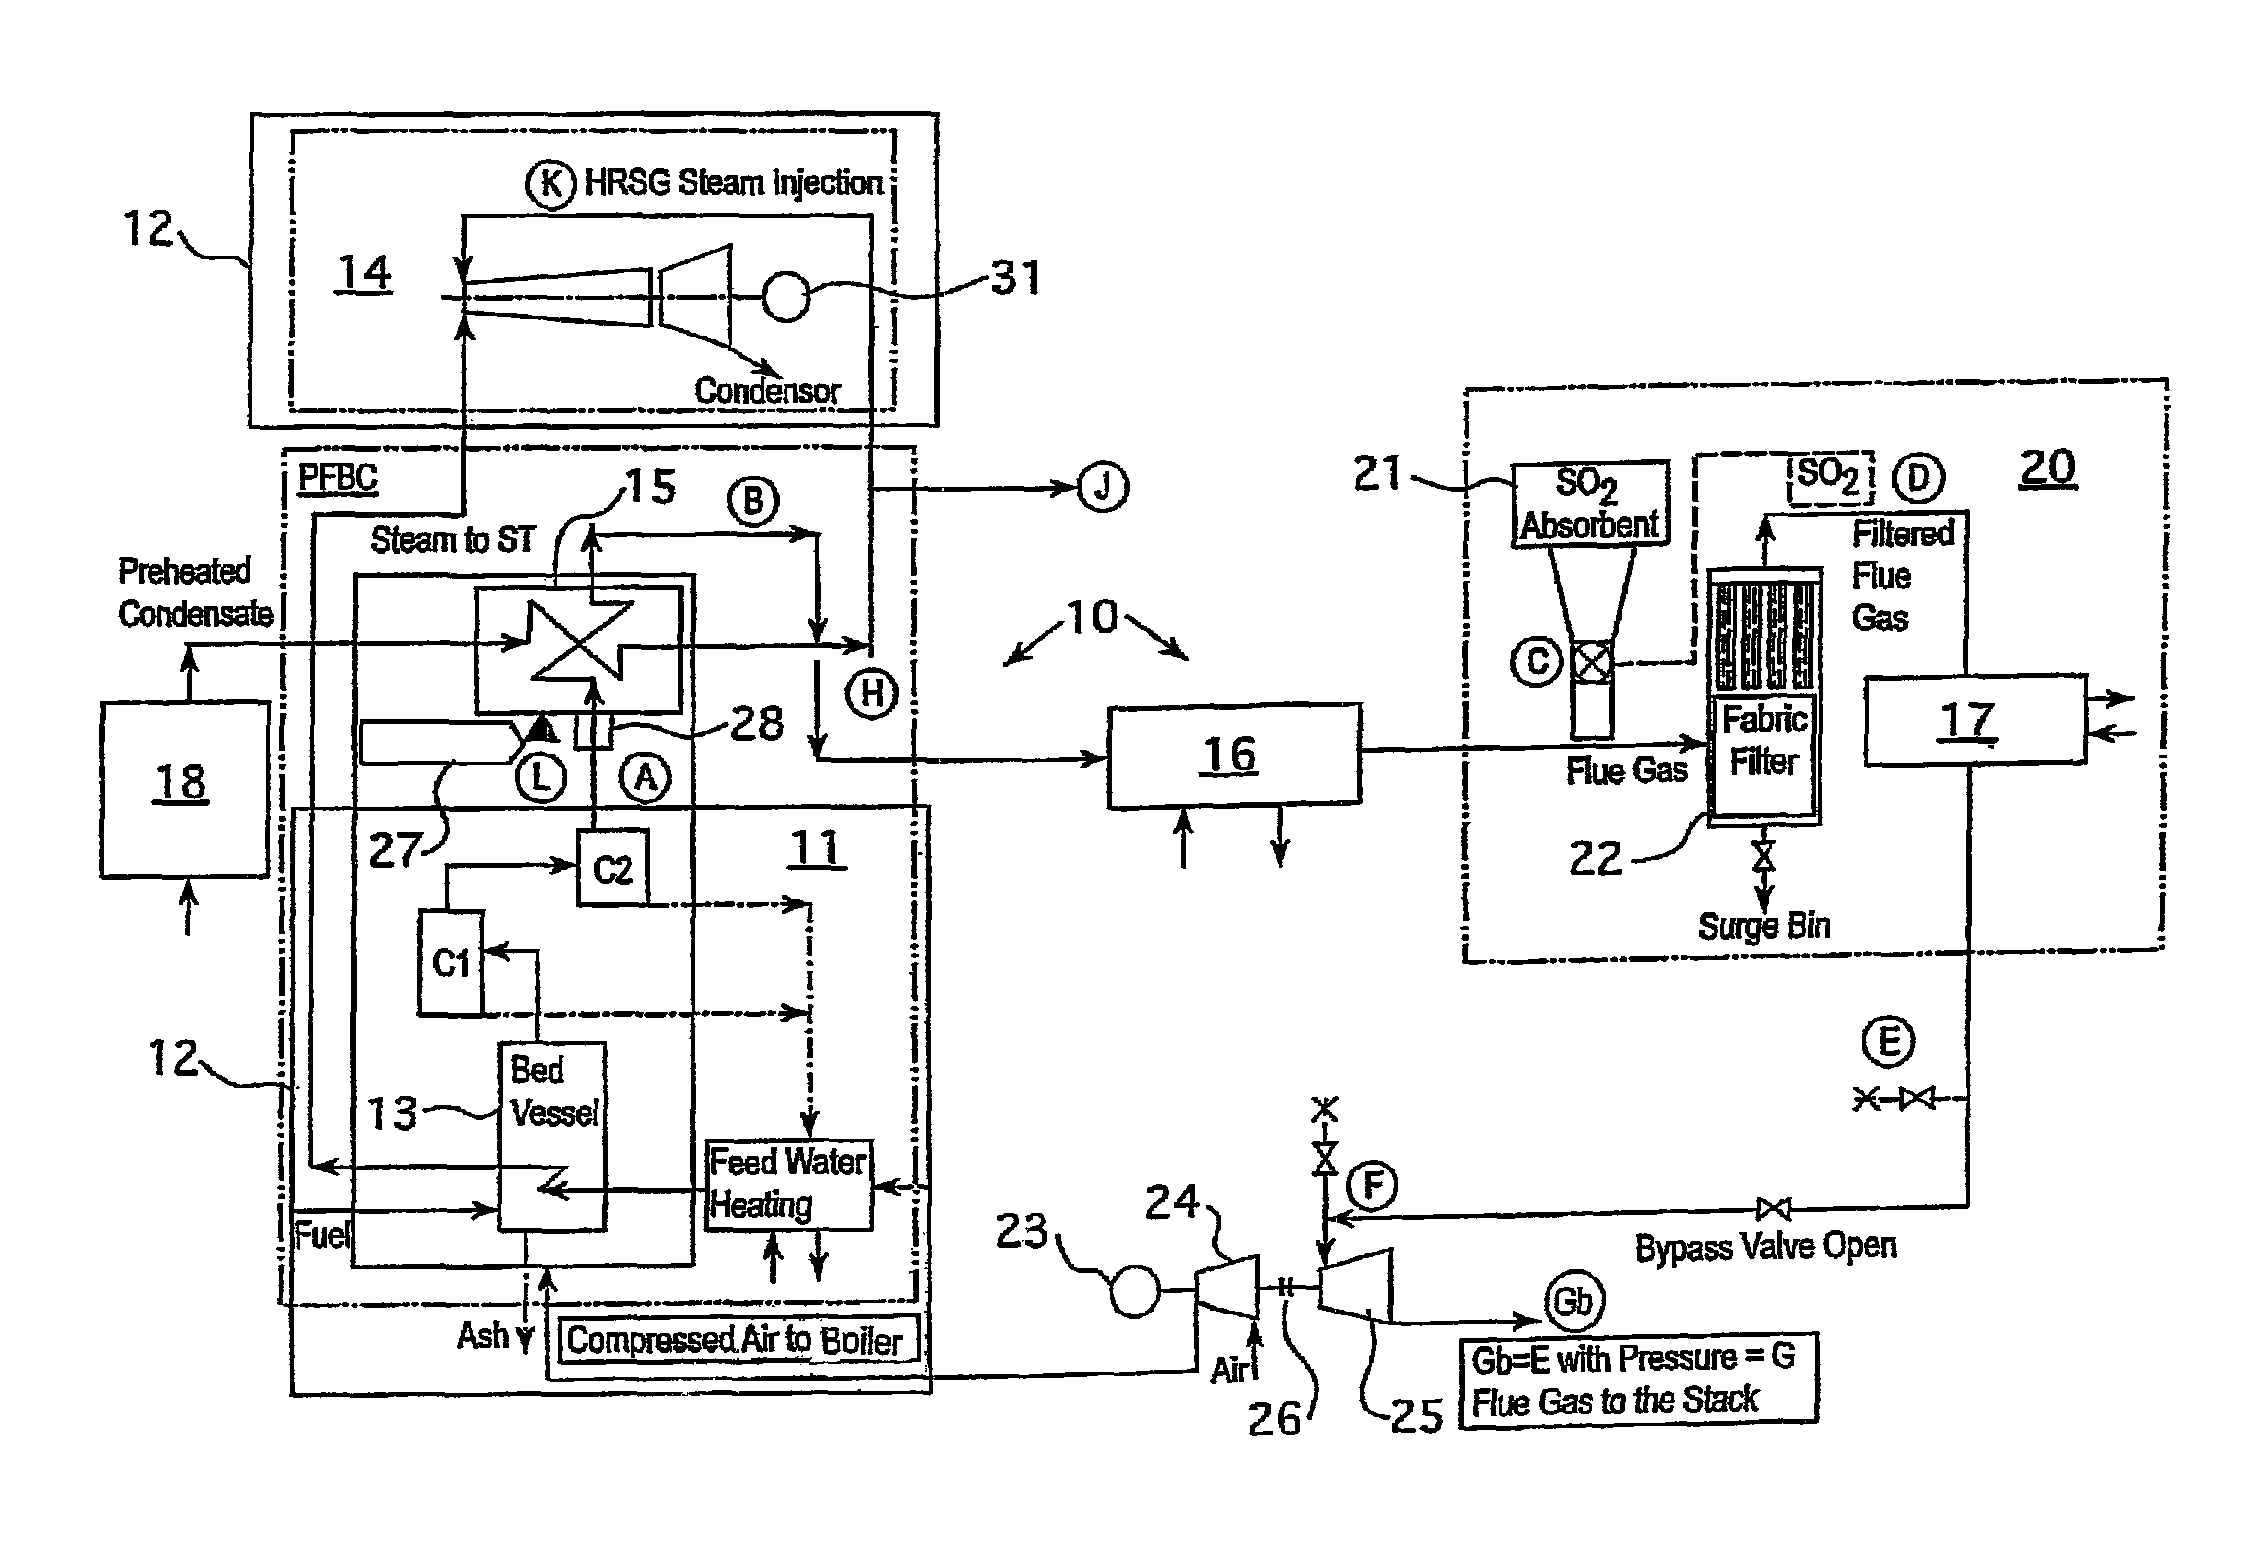 Carbon dioxide capture interface and power generation facility